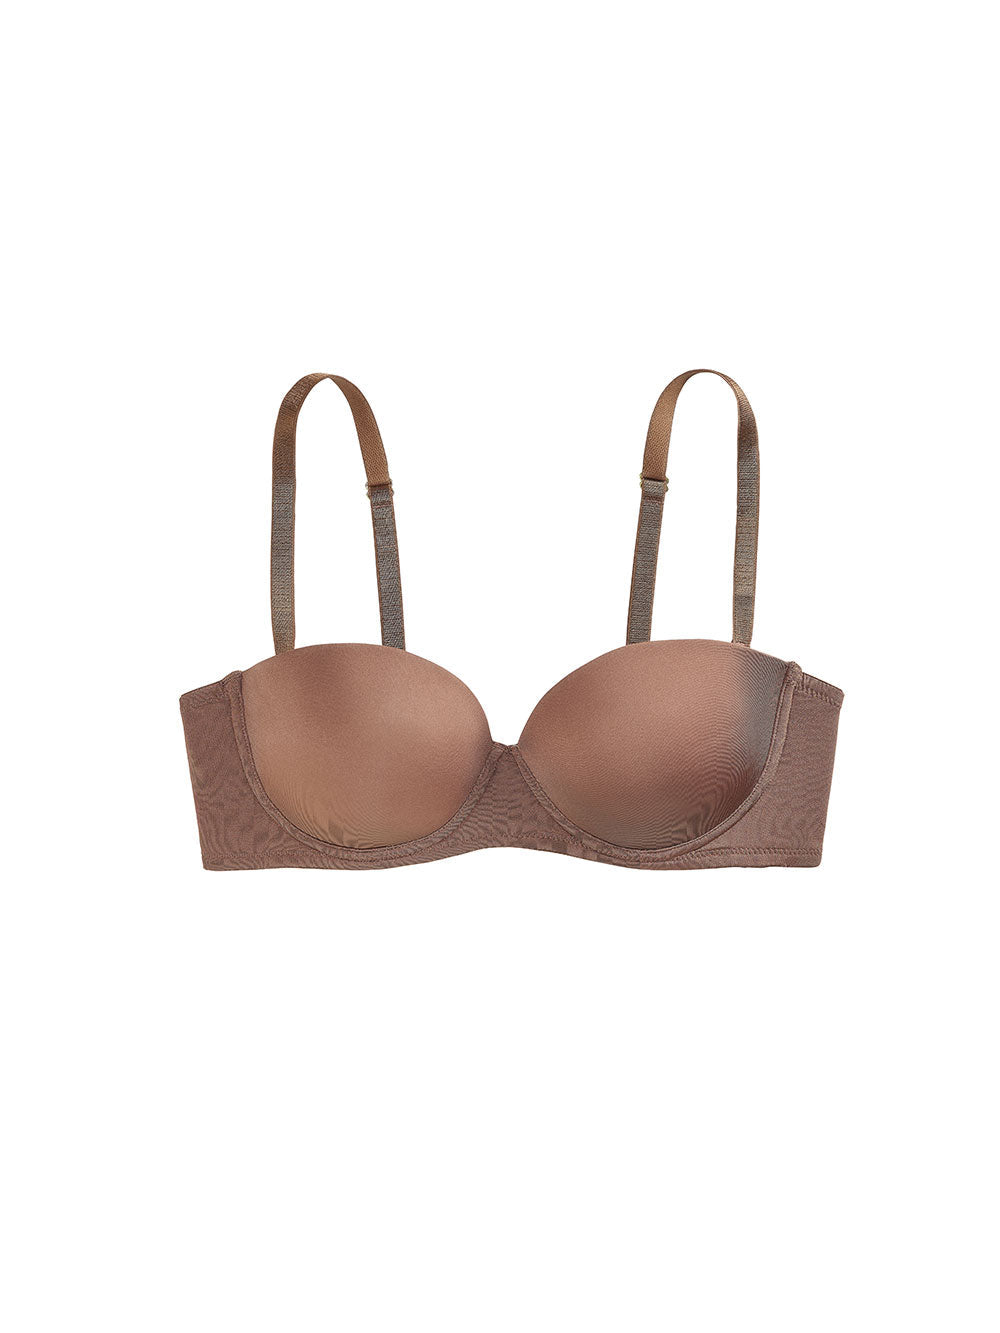 28A and 30A Bras – BRAS FOR SMALL CUPS